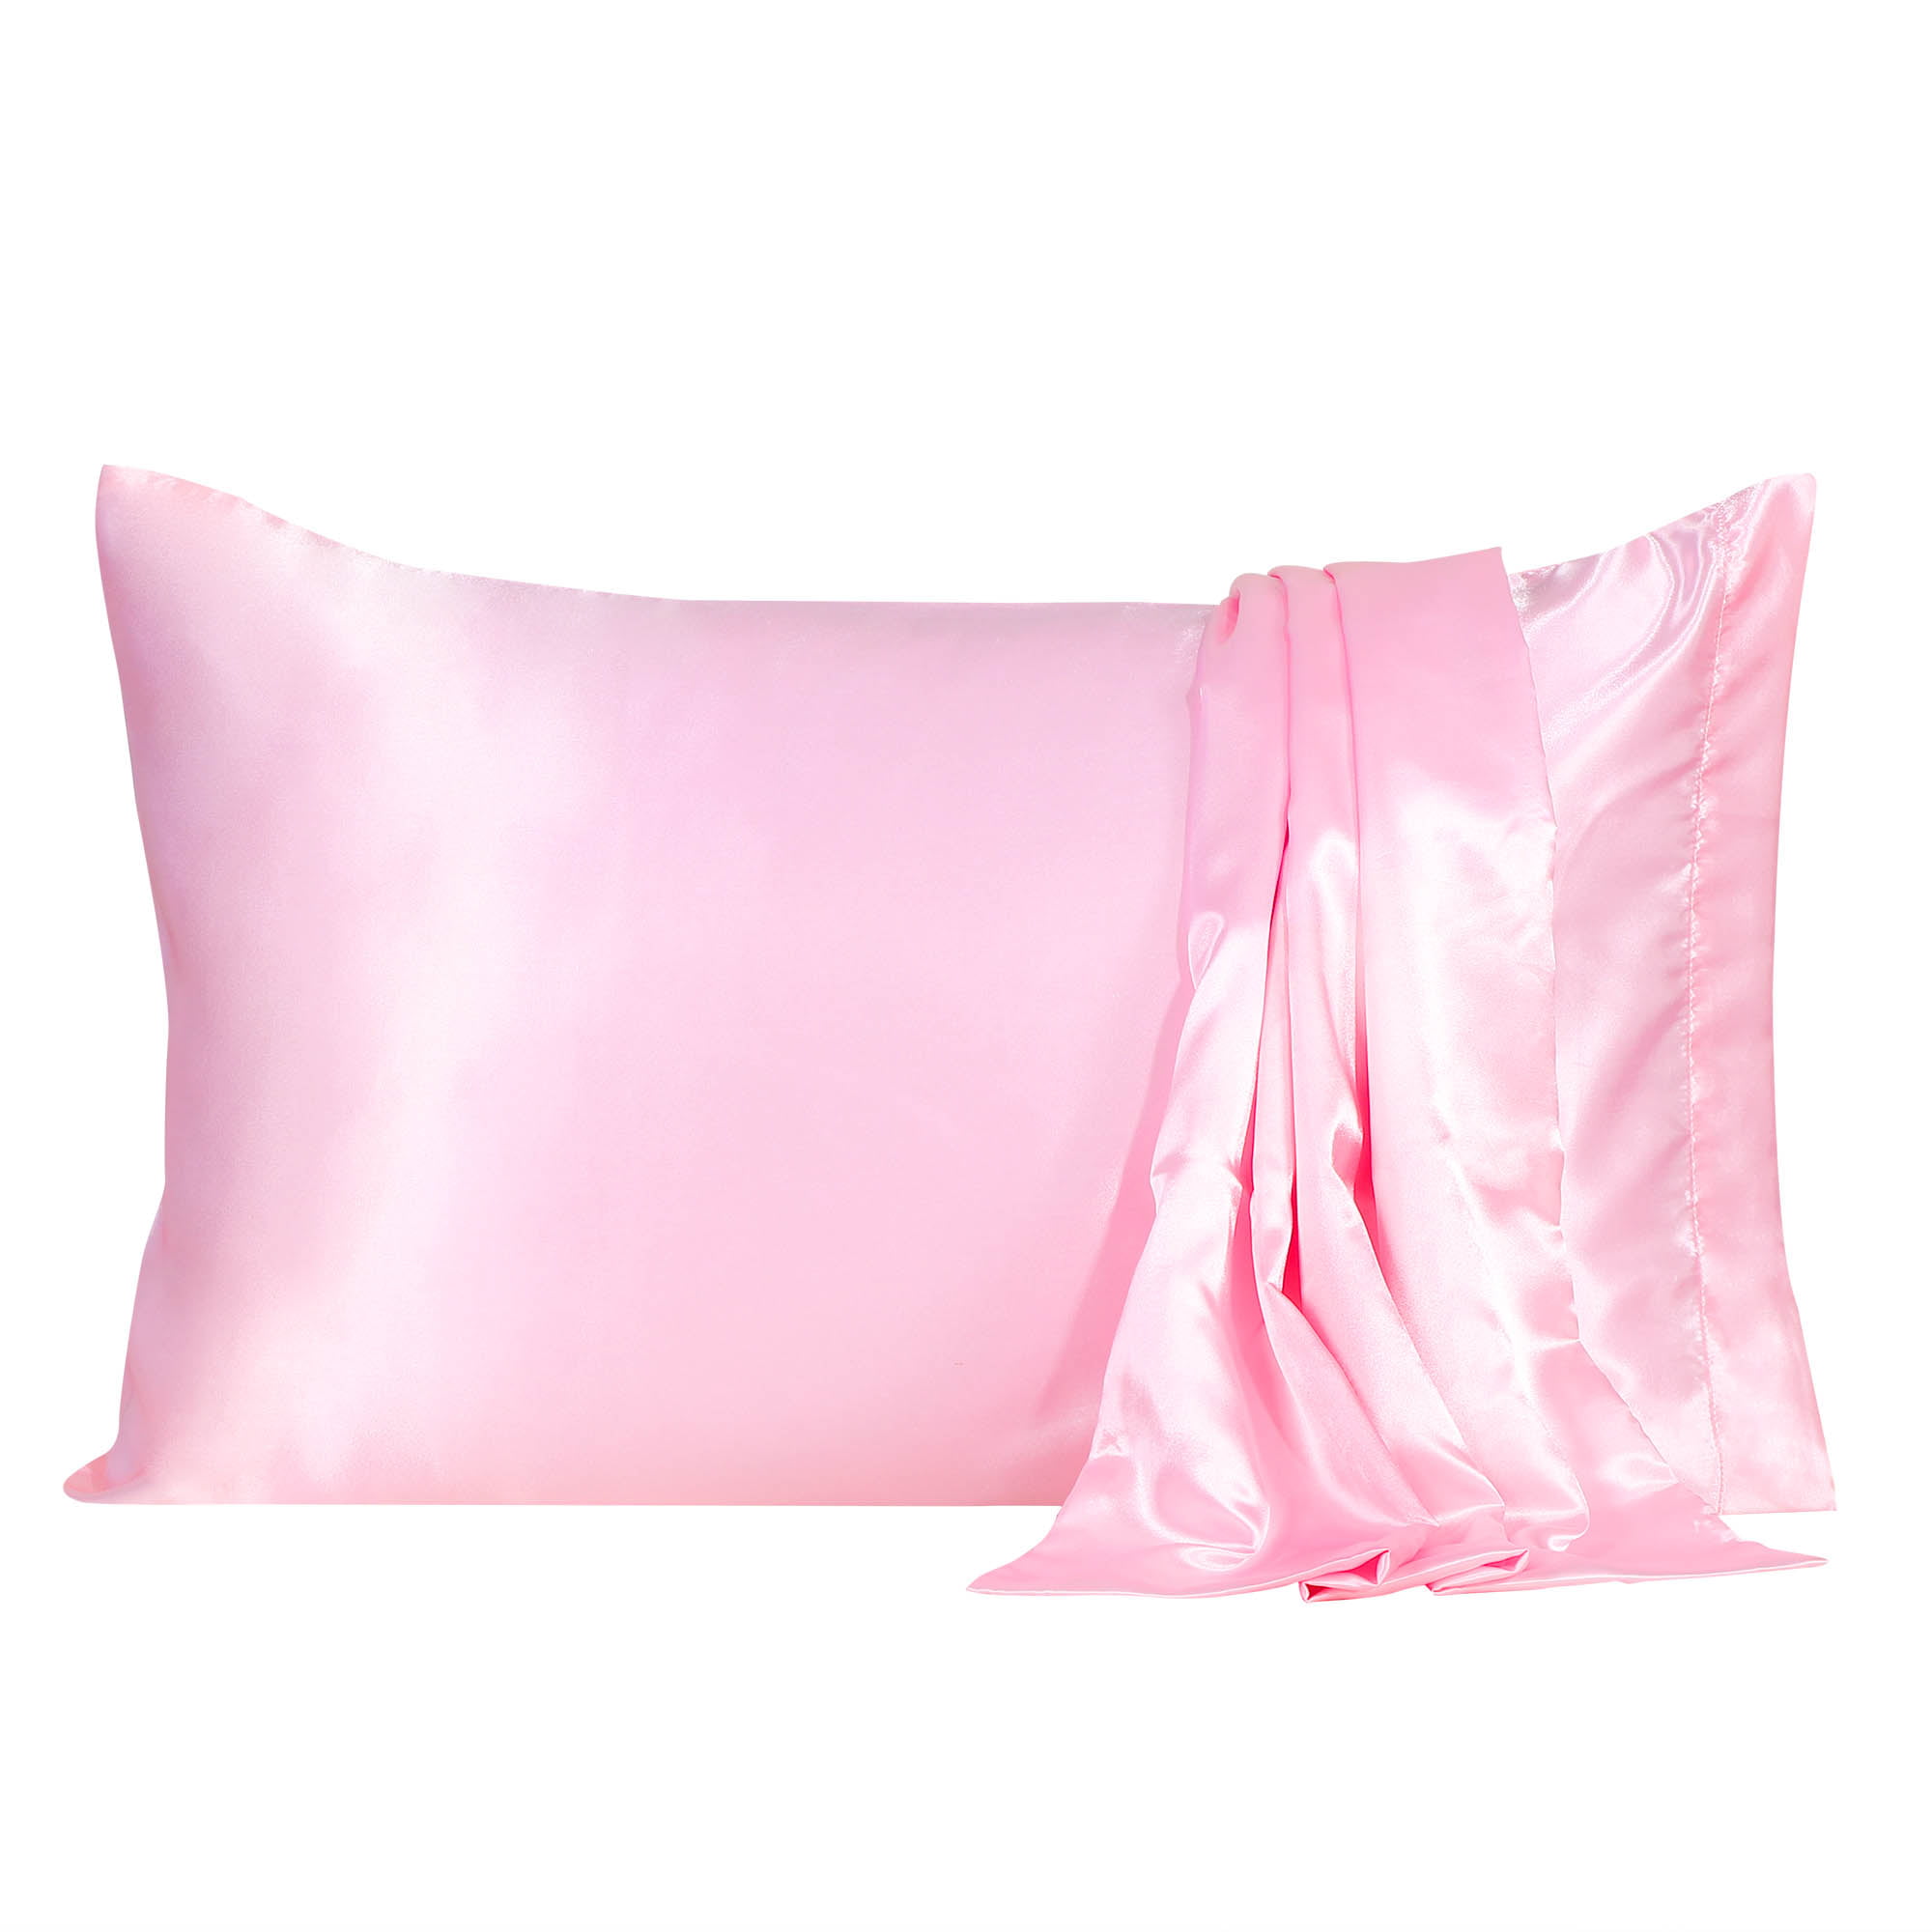 Details about   Kingria Satin Pillowcase for Hair and Skin Zipper Free 2 Pack King Pink